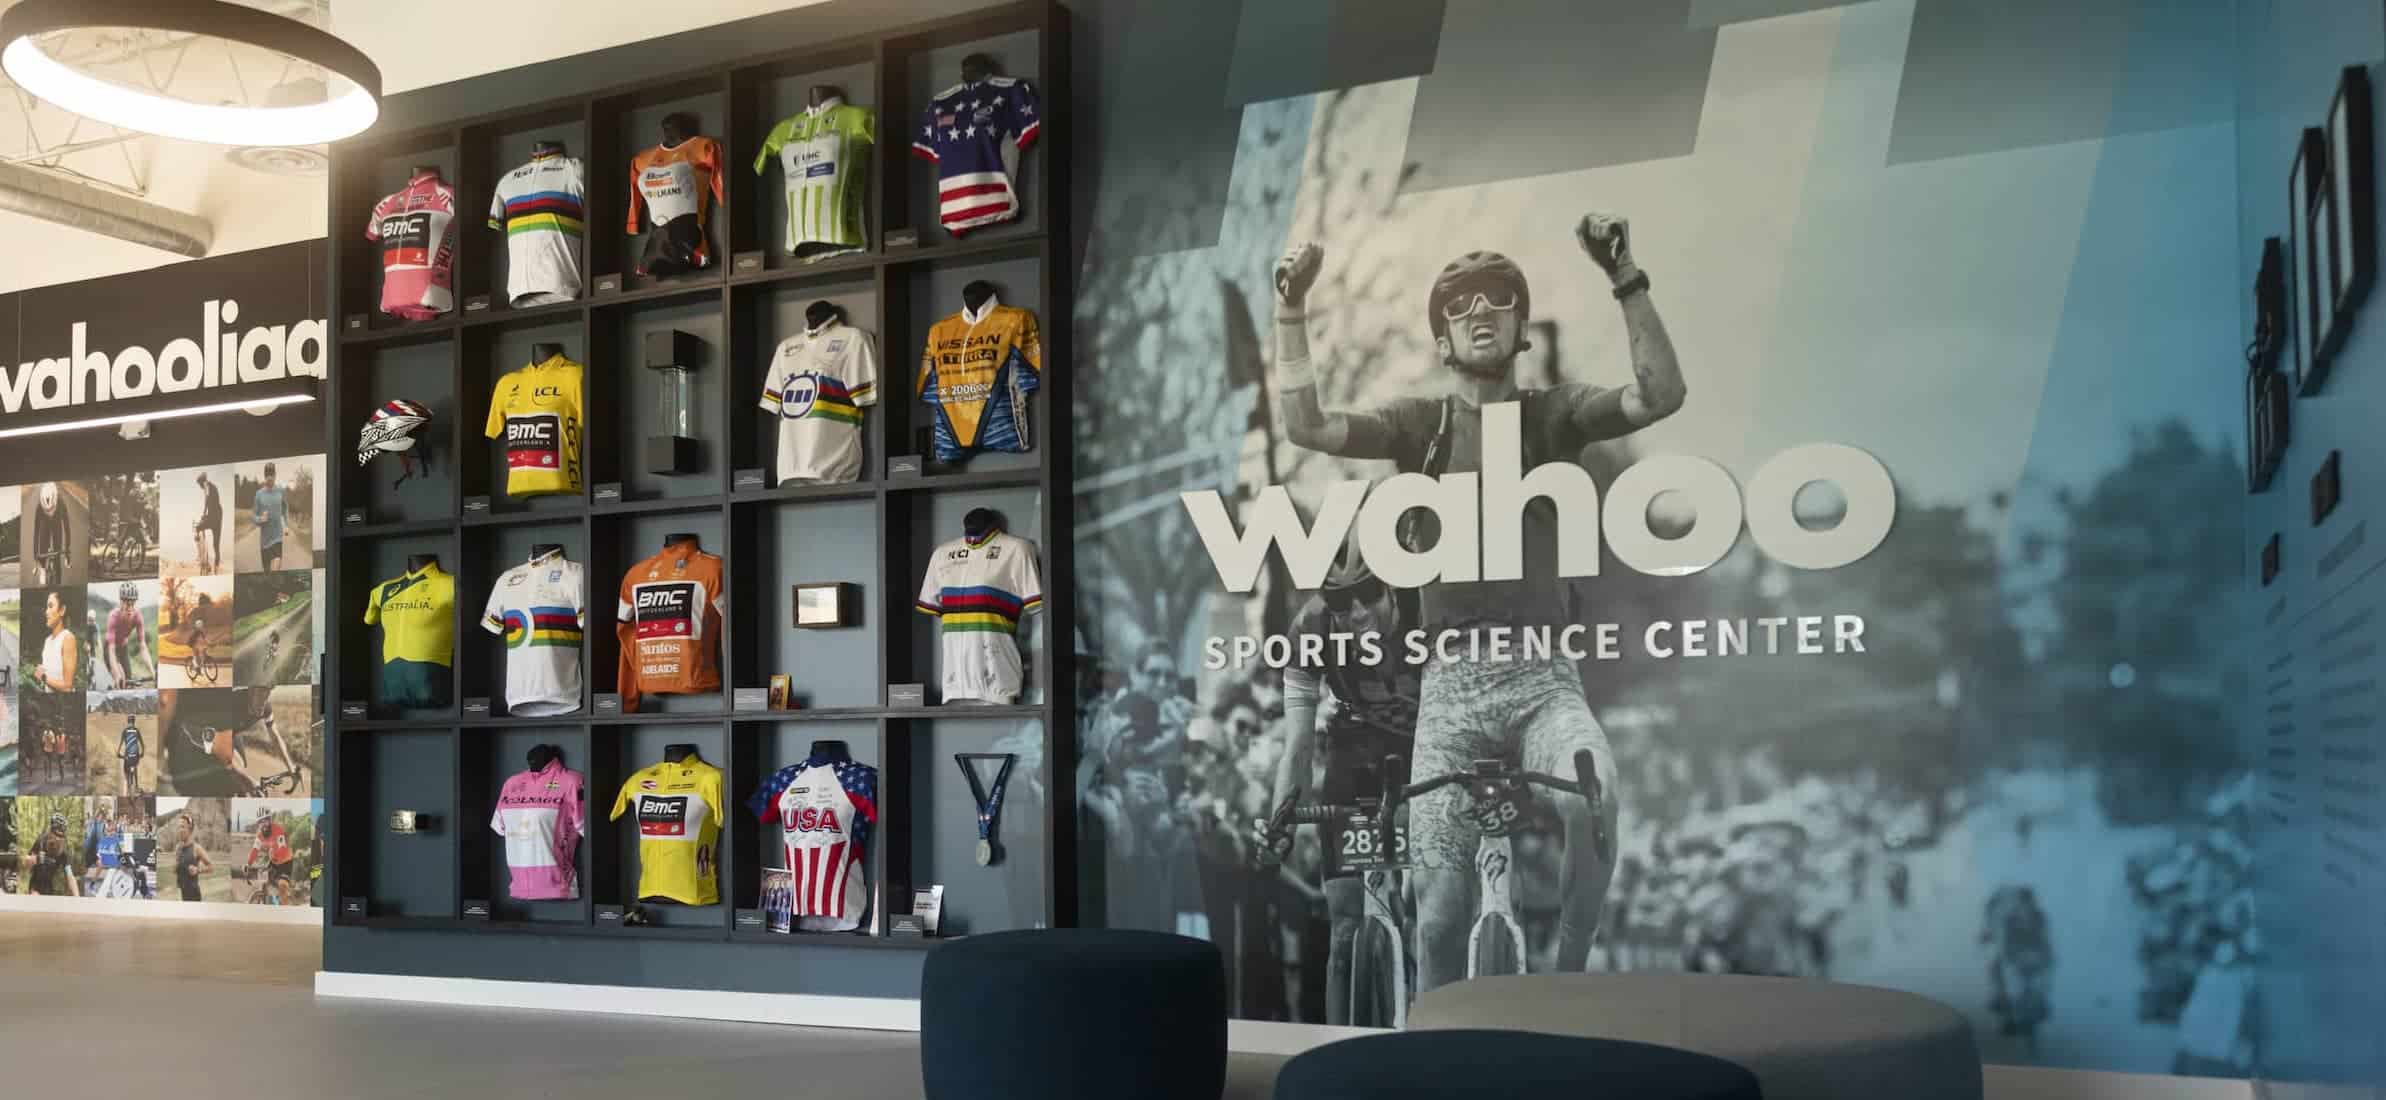 Wahoo announces proprietary sports science facility dedicated to shaping the future of connected fitness technology